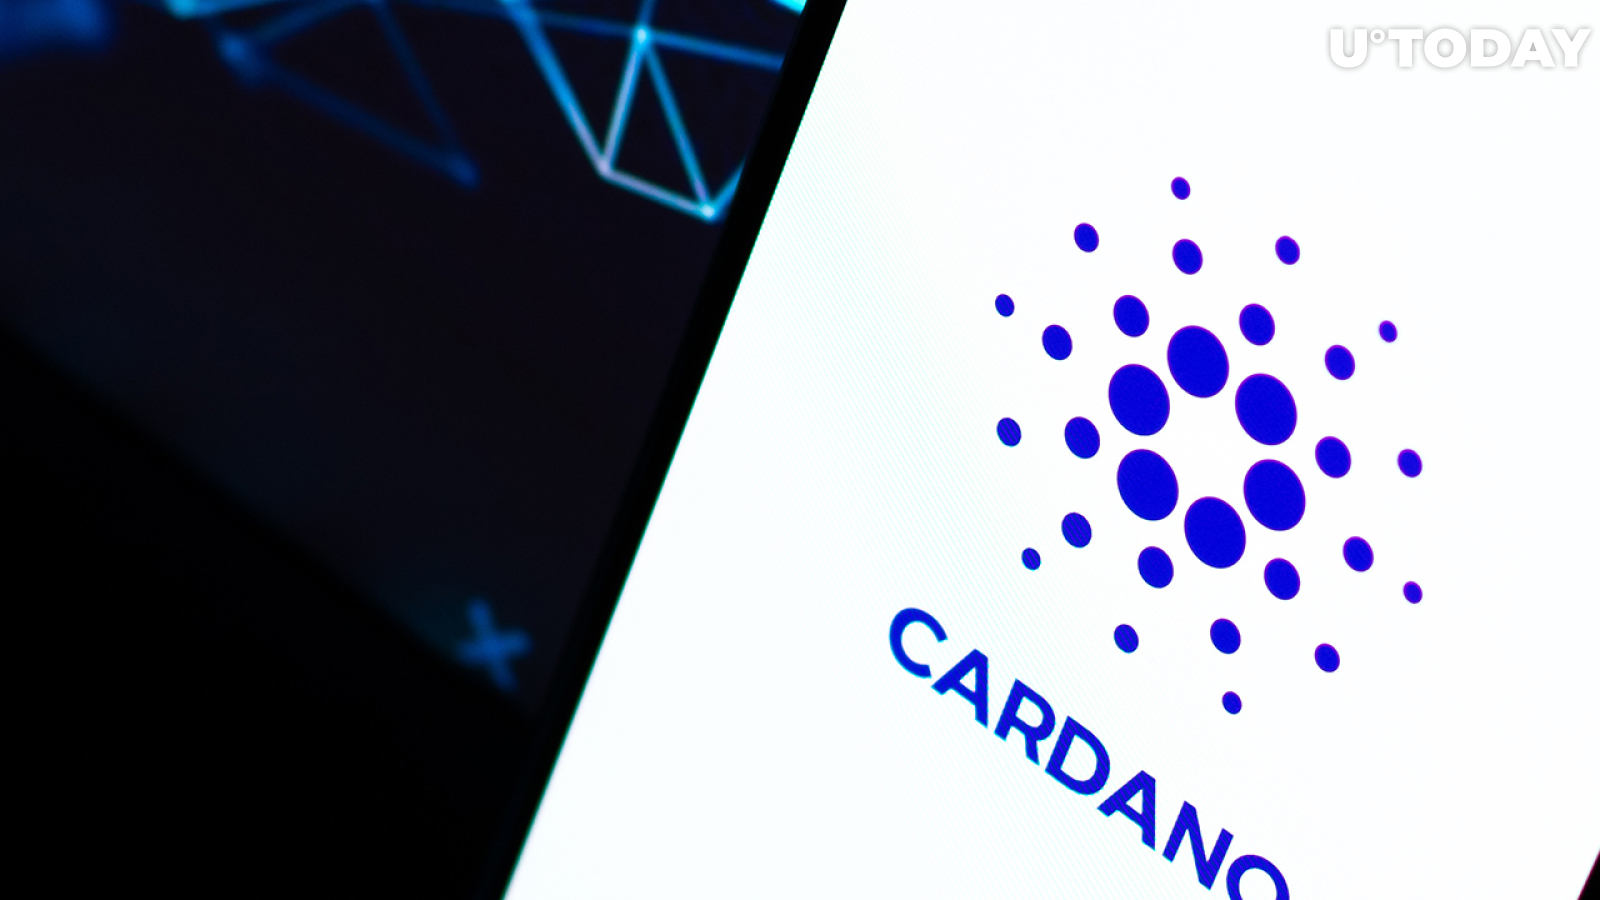 CyberCapital CIO Highlights Why Cardano Is Lagging Behind Other Networks